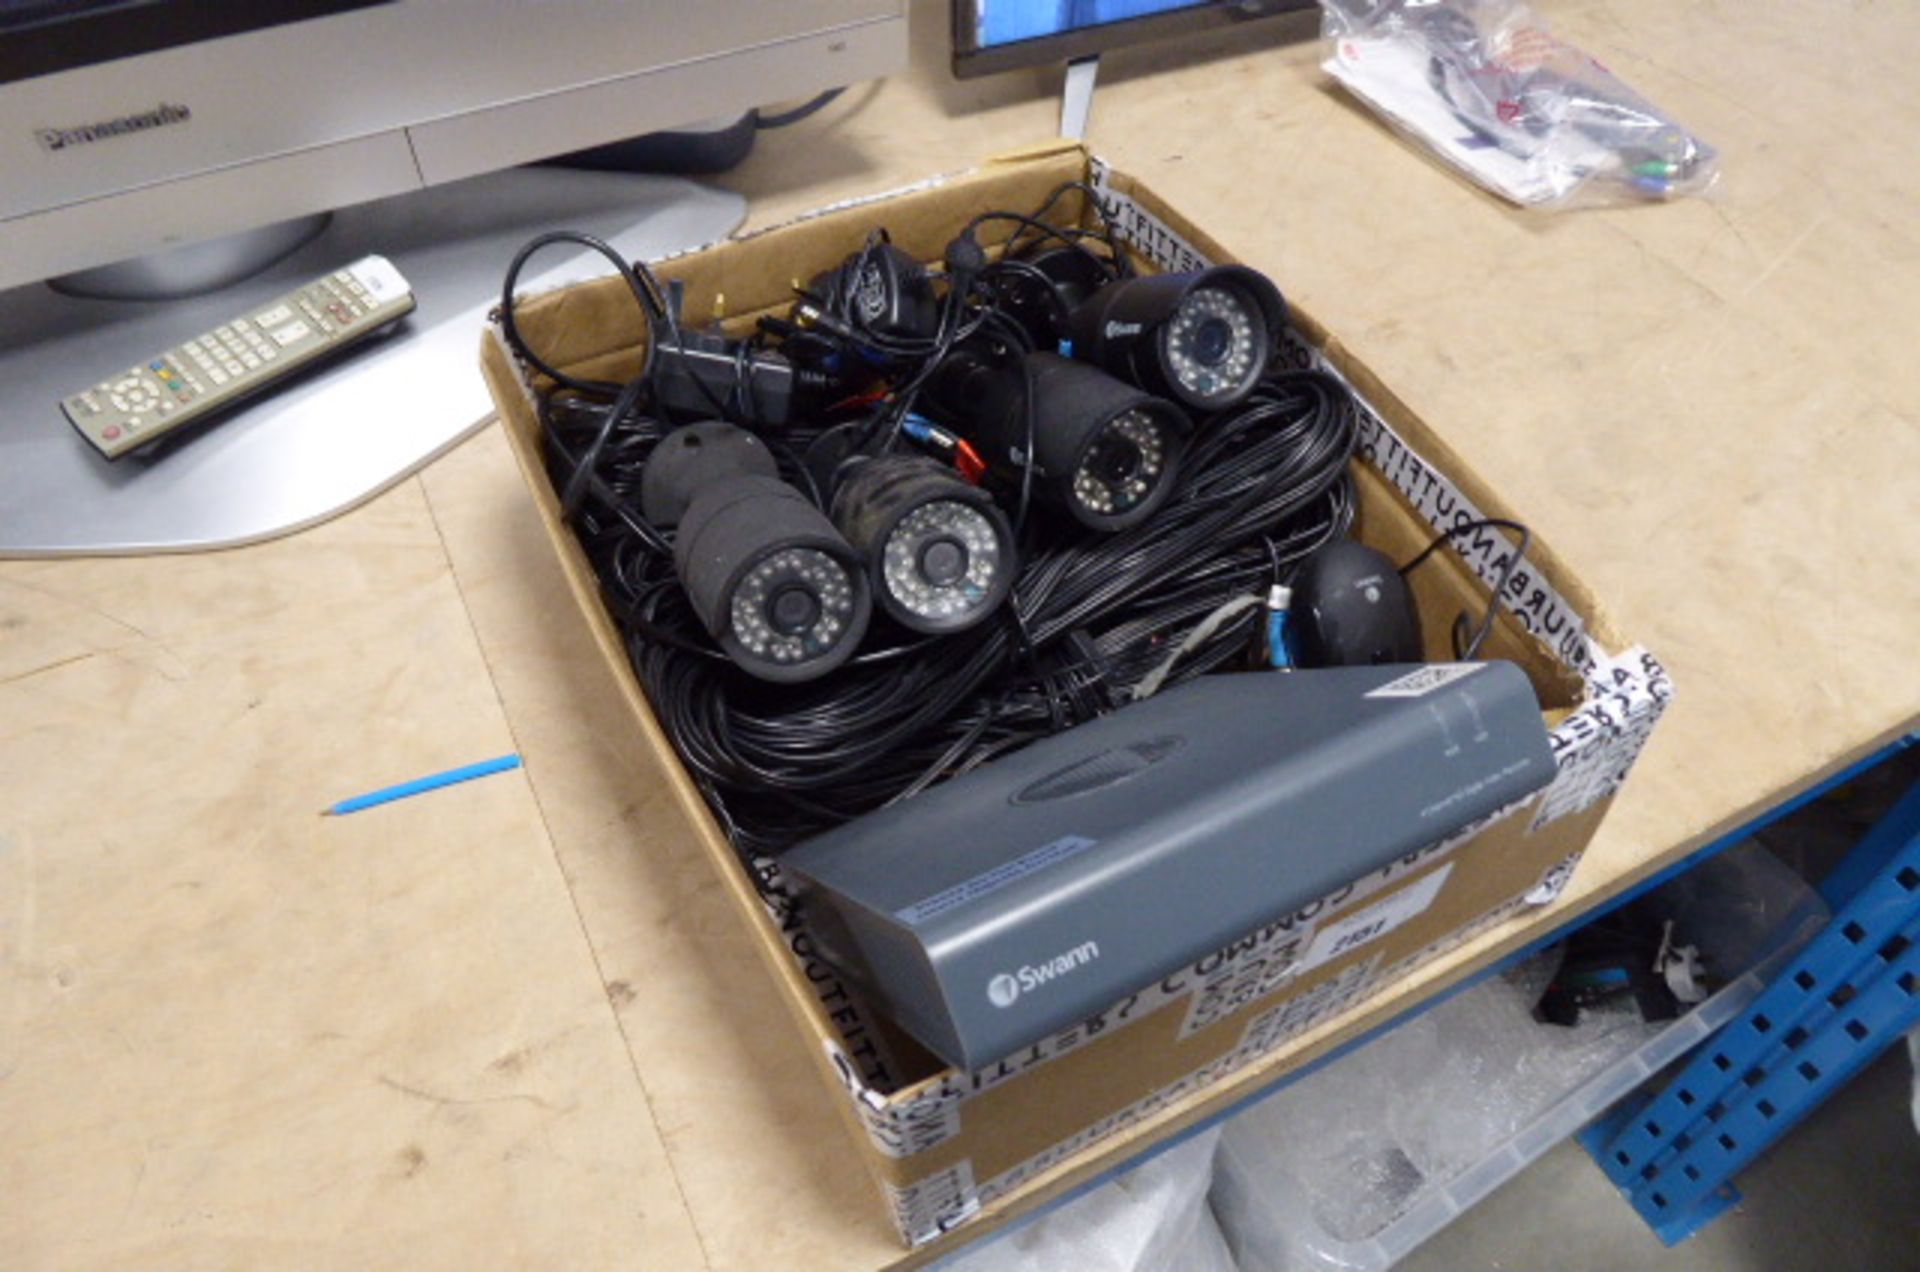 Swan four channel HD video recorder four swan cameras, power packs, mice and cabling